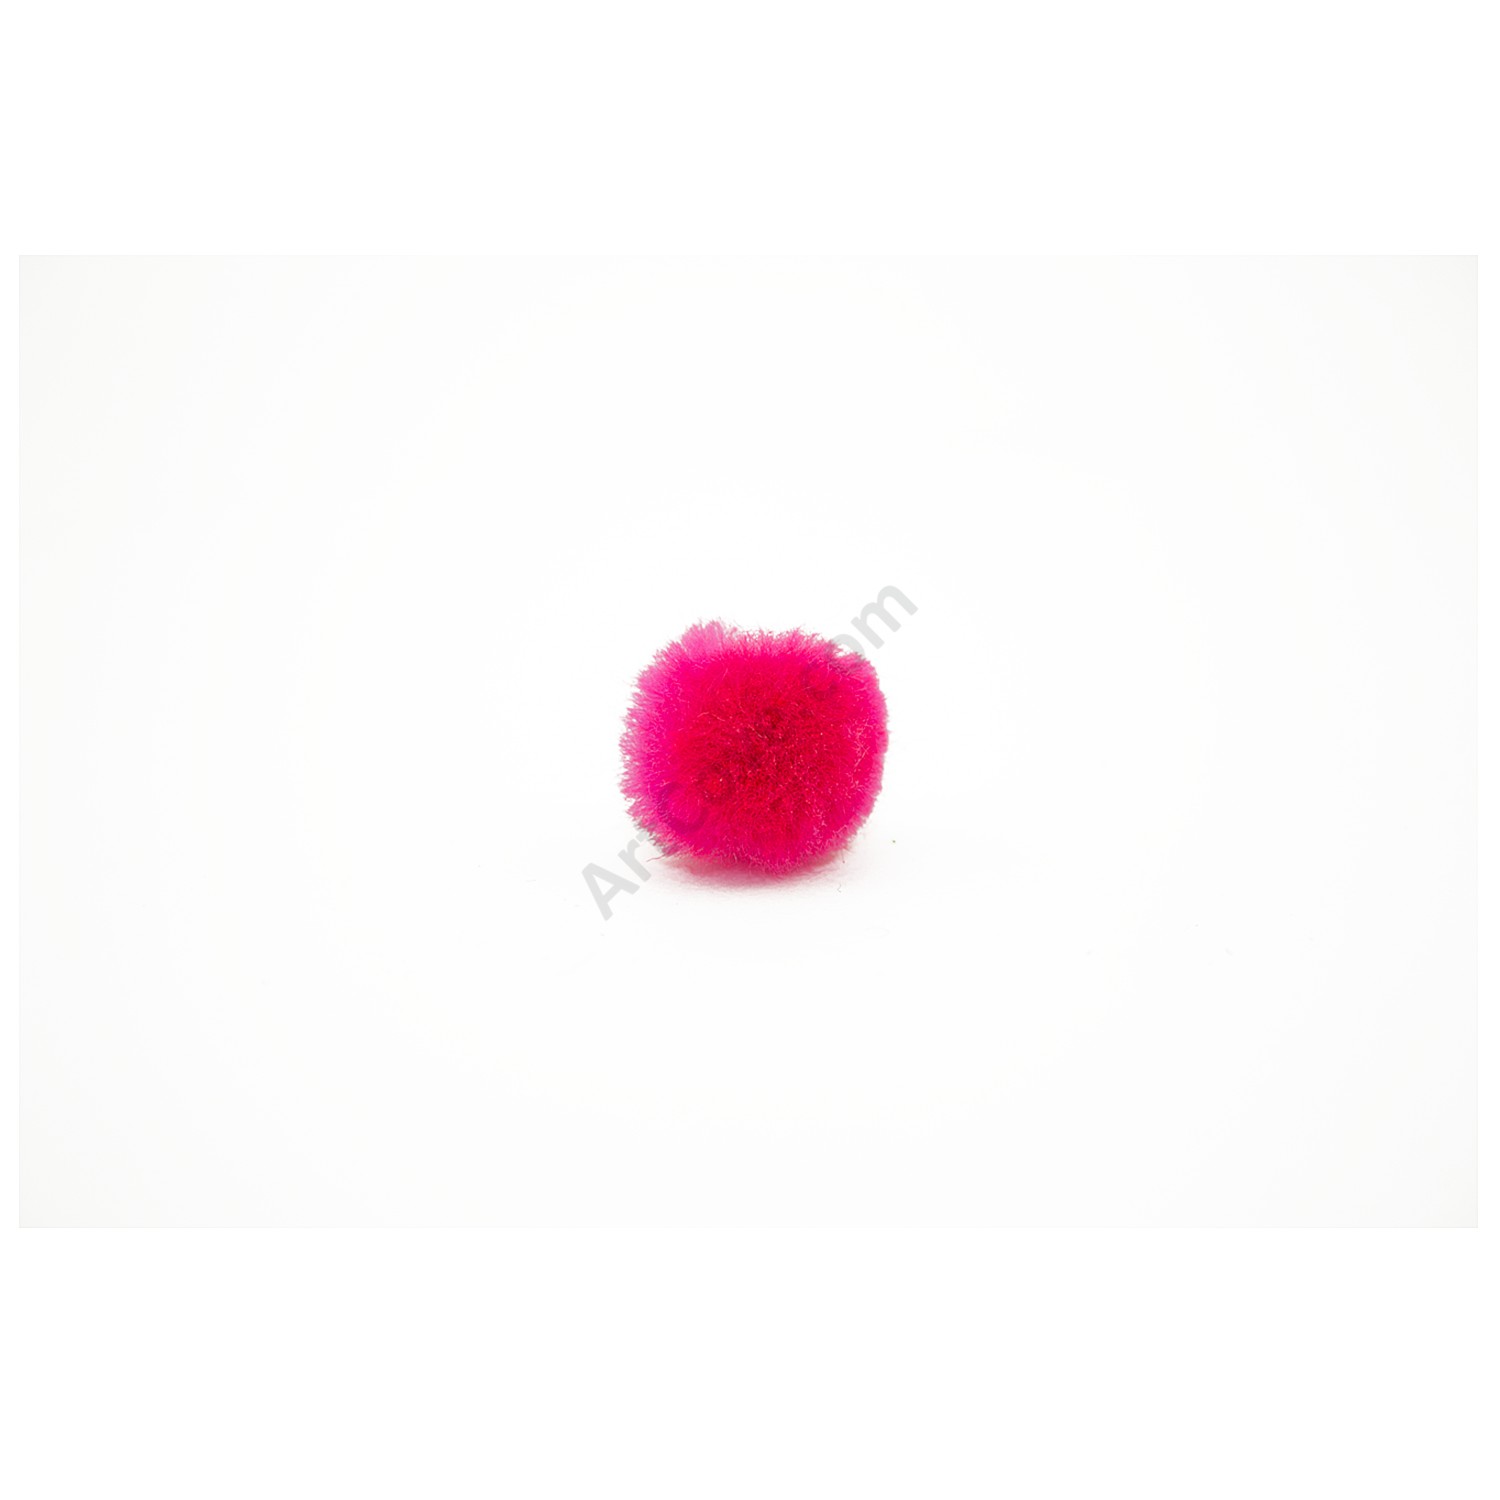 3/4 inch Neon Pink Small Craft Pom Poms 100 Pieces